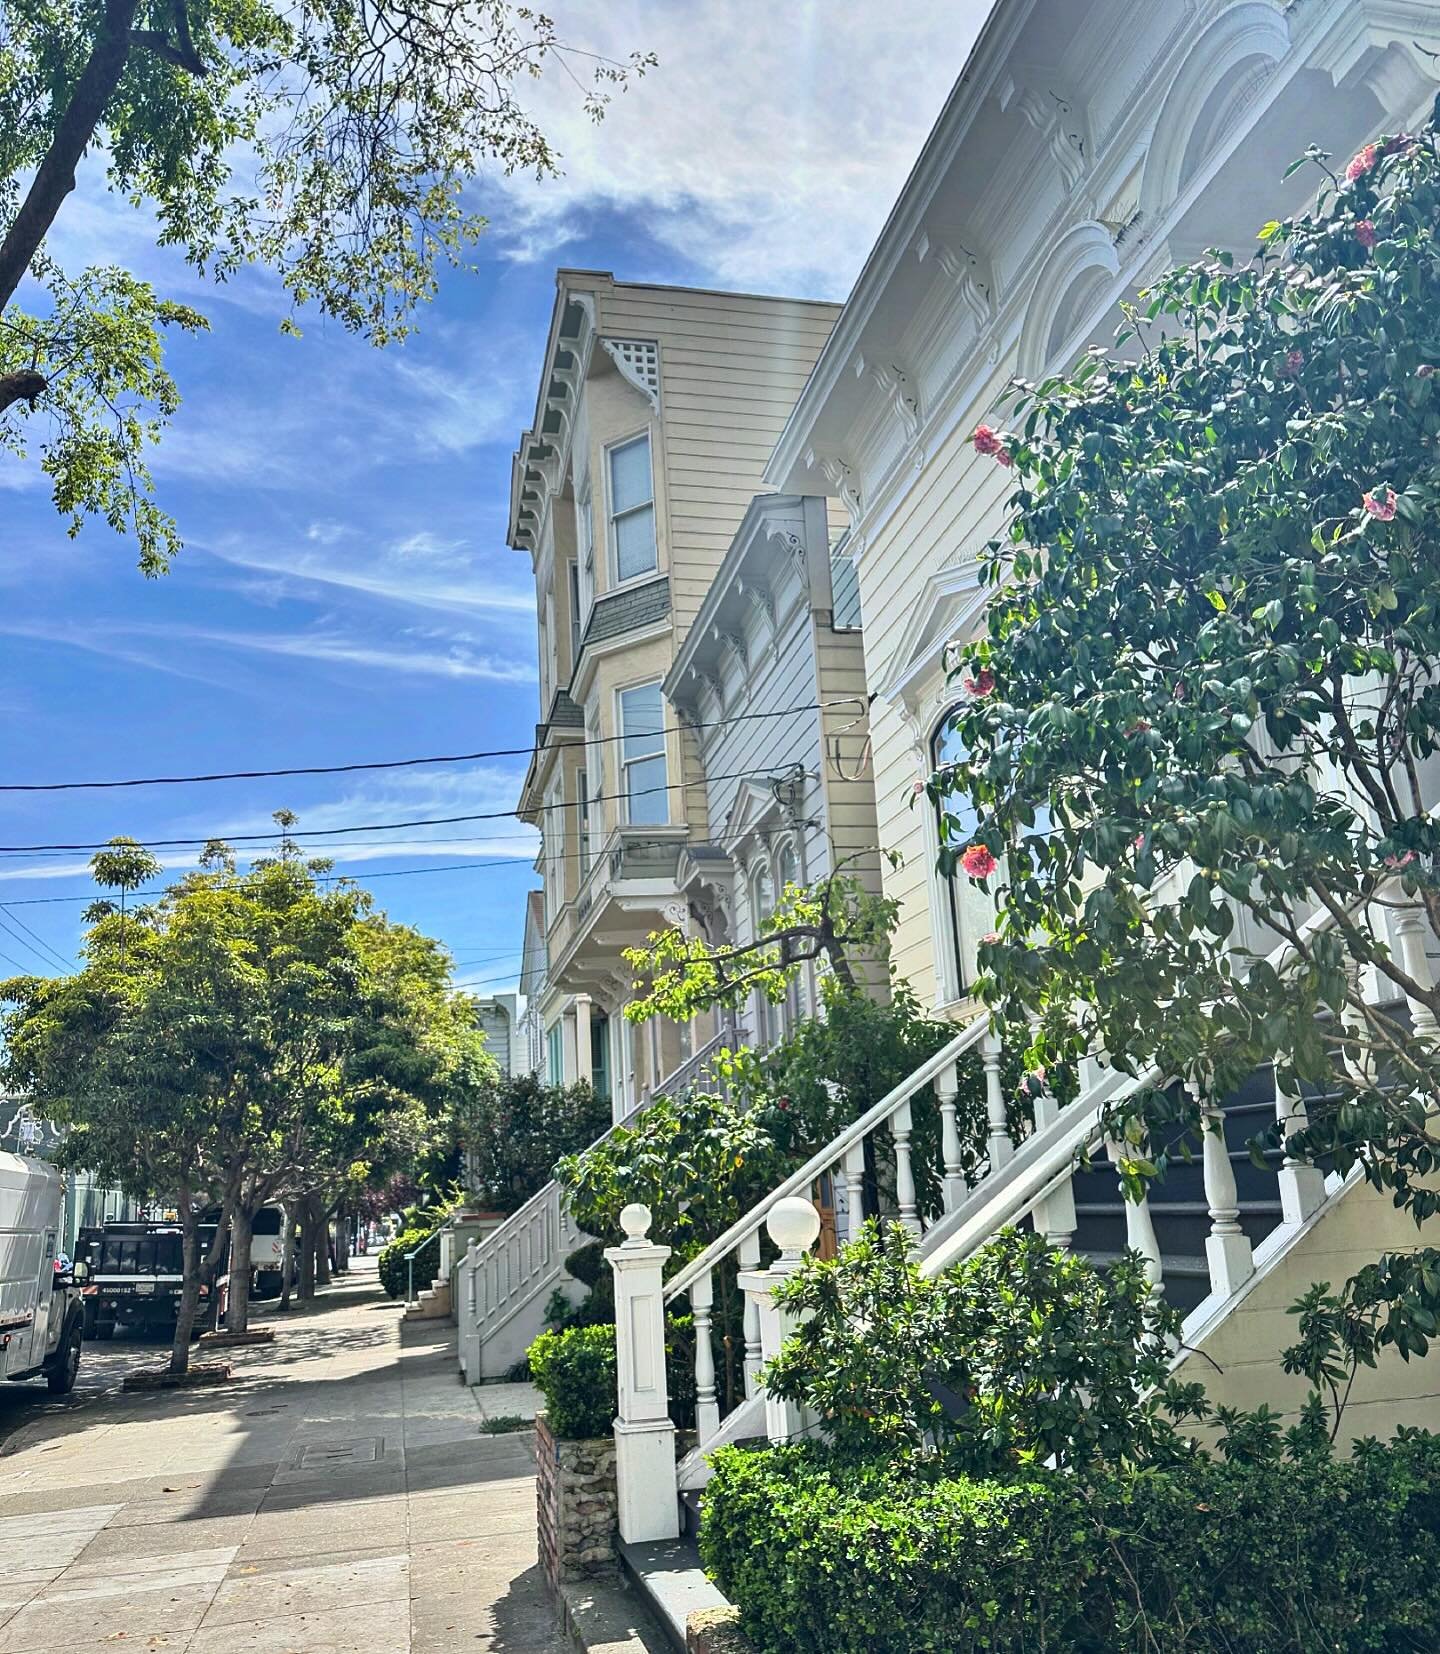 Neighborhood walks on sunny days. What could be better? 

#lowerpacheights #sanfrancisco #sfrealtor #sanfranciscorealestate #sfrealestate #localagent #lovewhereyoulive #cityrealestate #cityrealestatesf #springinsf